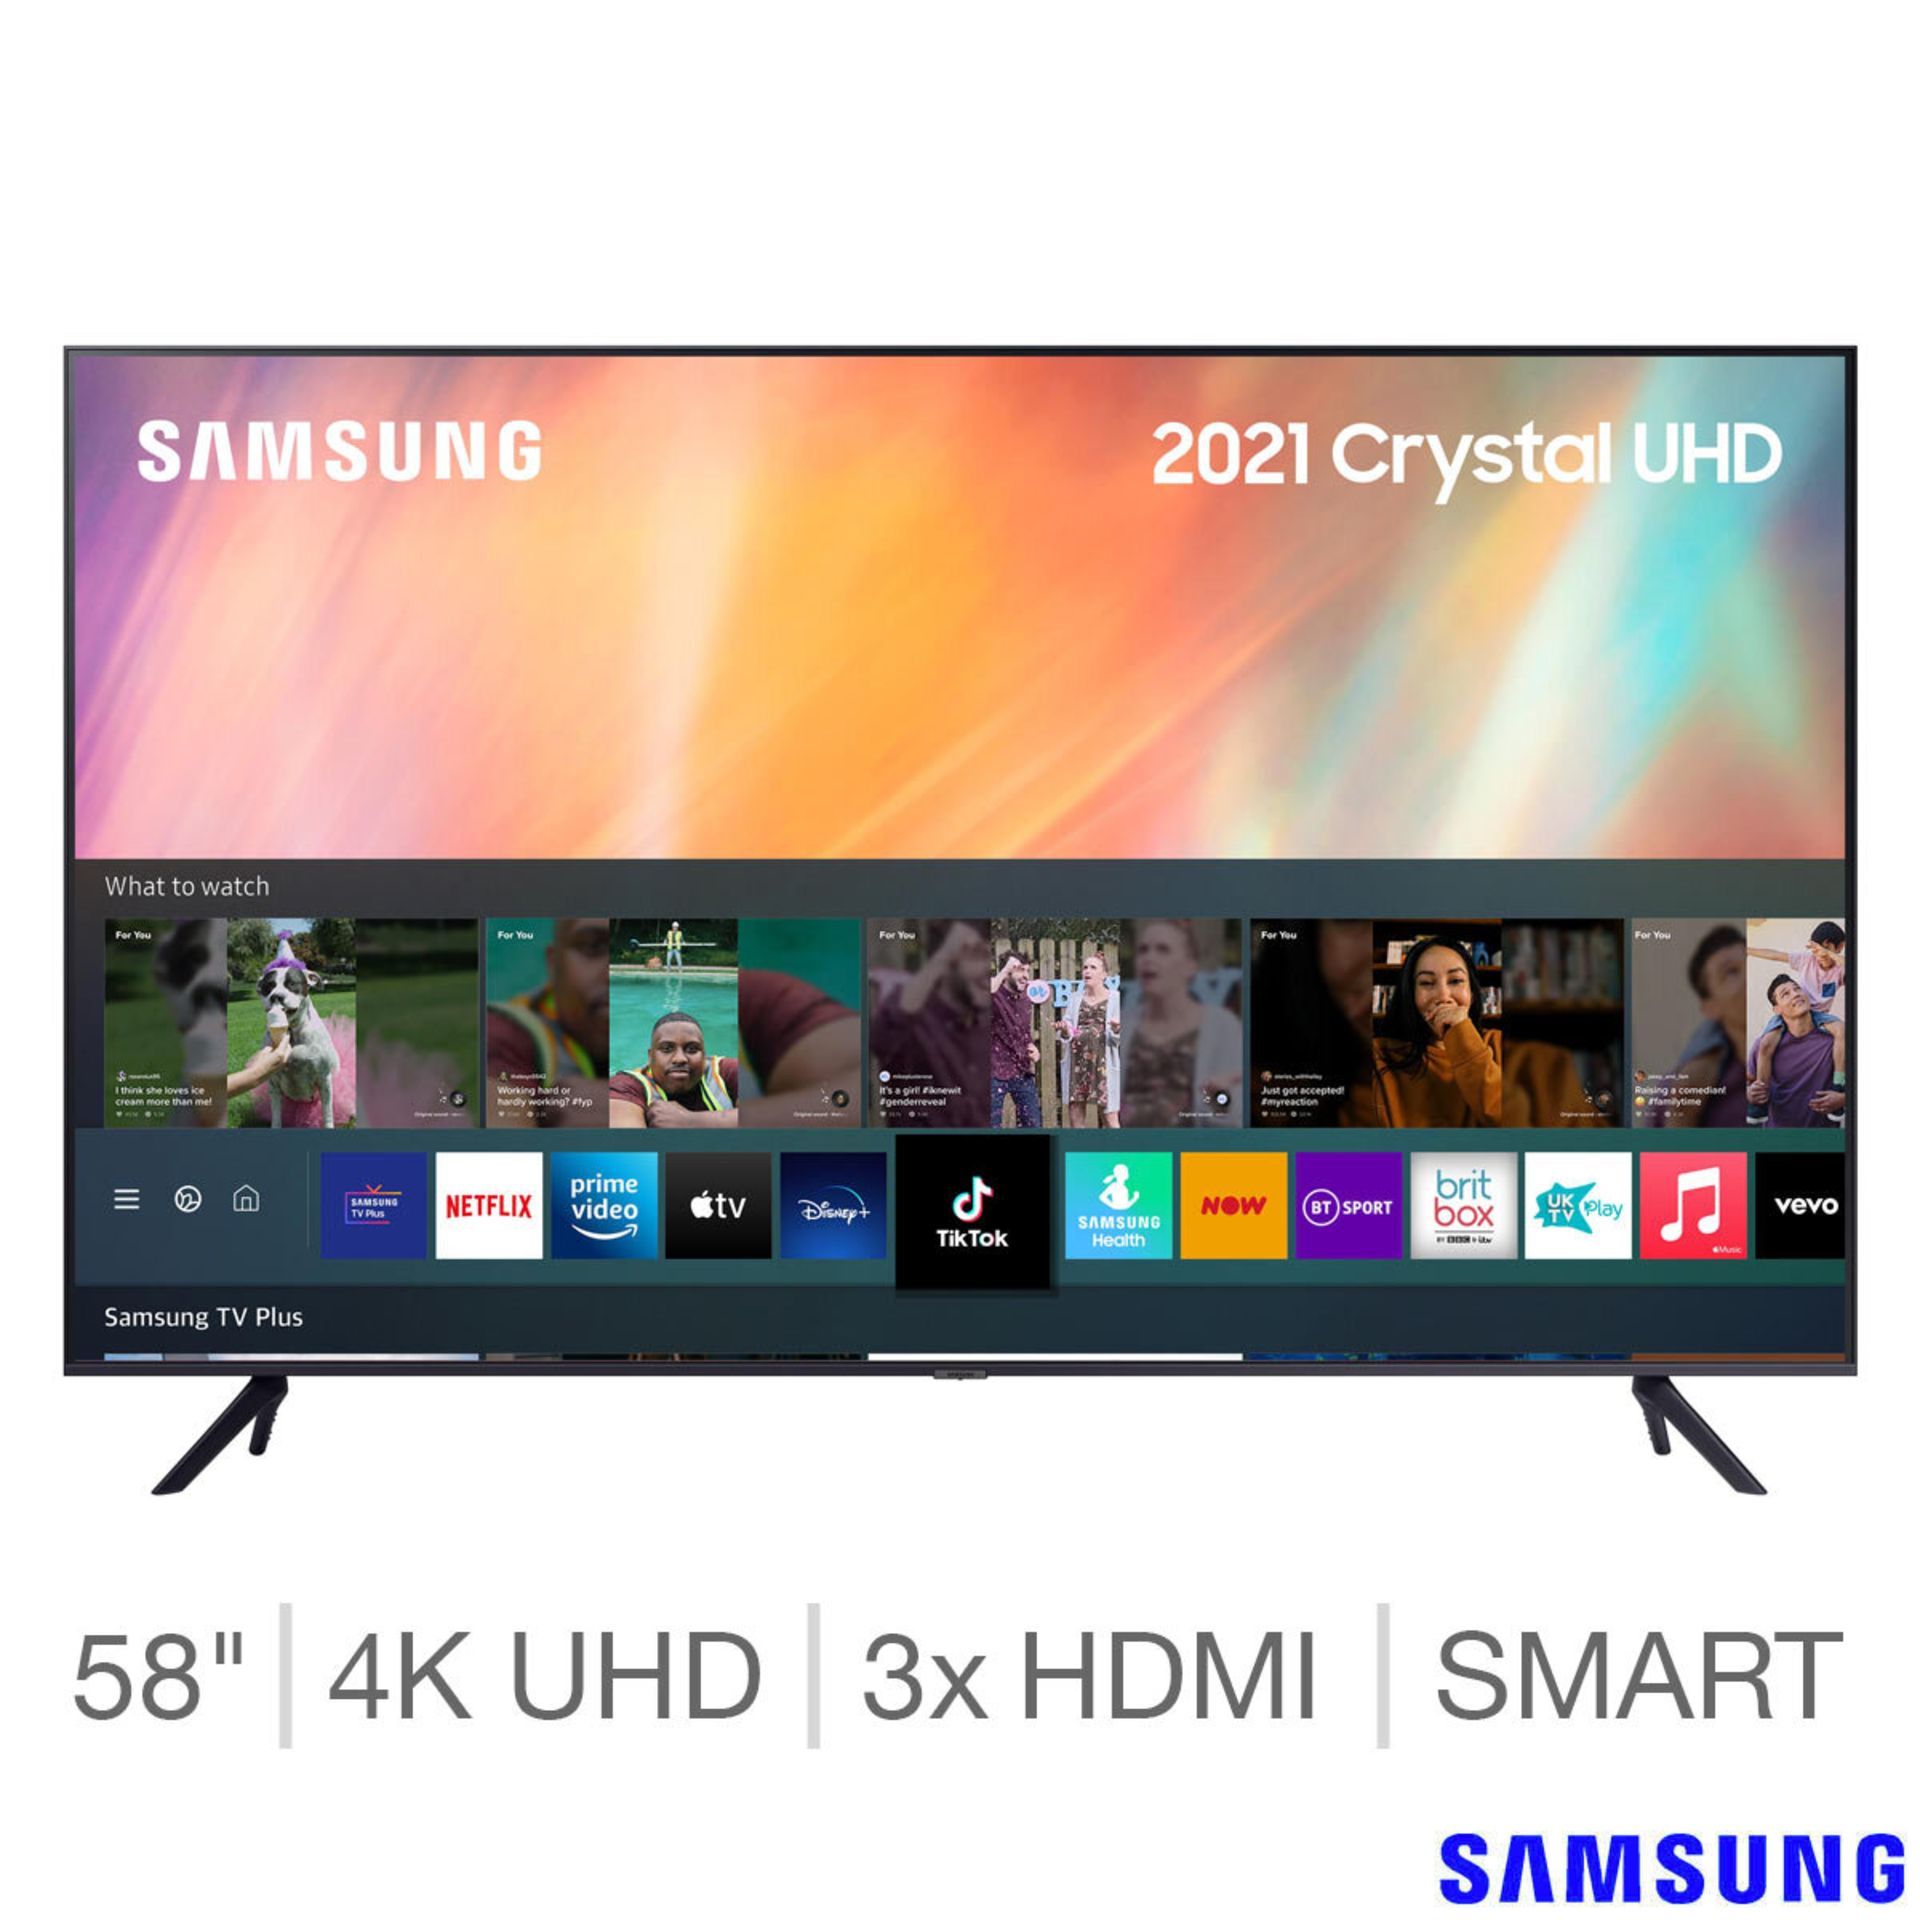 1 SAMSUNG 58" TU7110 CRYSTAL UHD 4K HDR SMART TV WITH REMOTE RRP Â£599 (BLACK SCREEN, SCRATCHES)